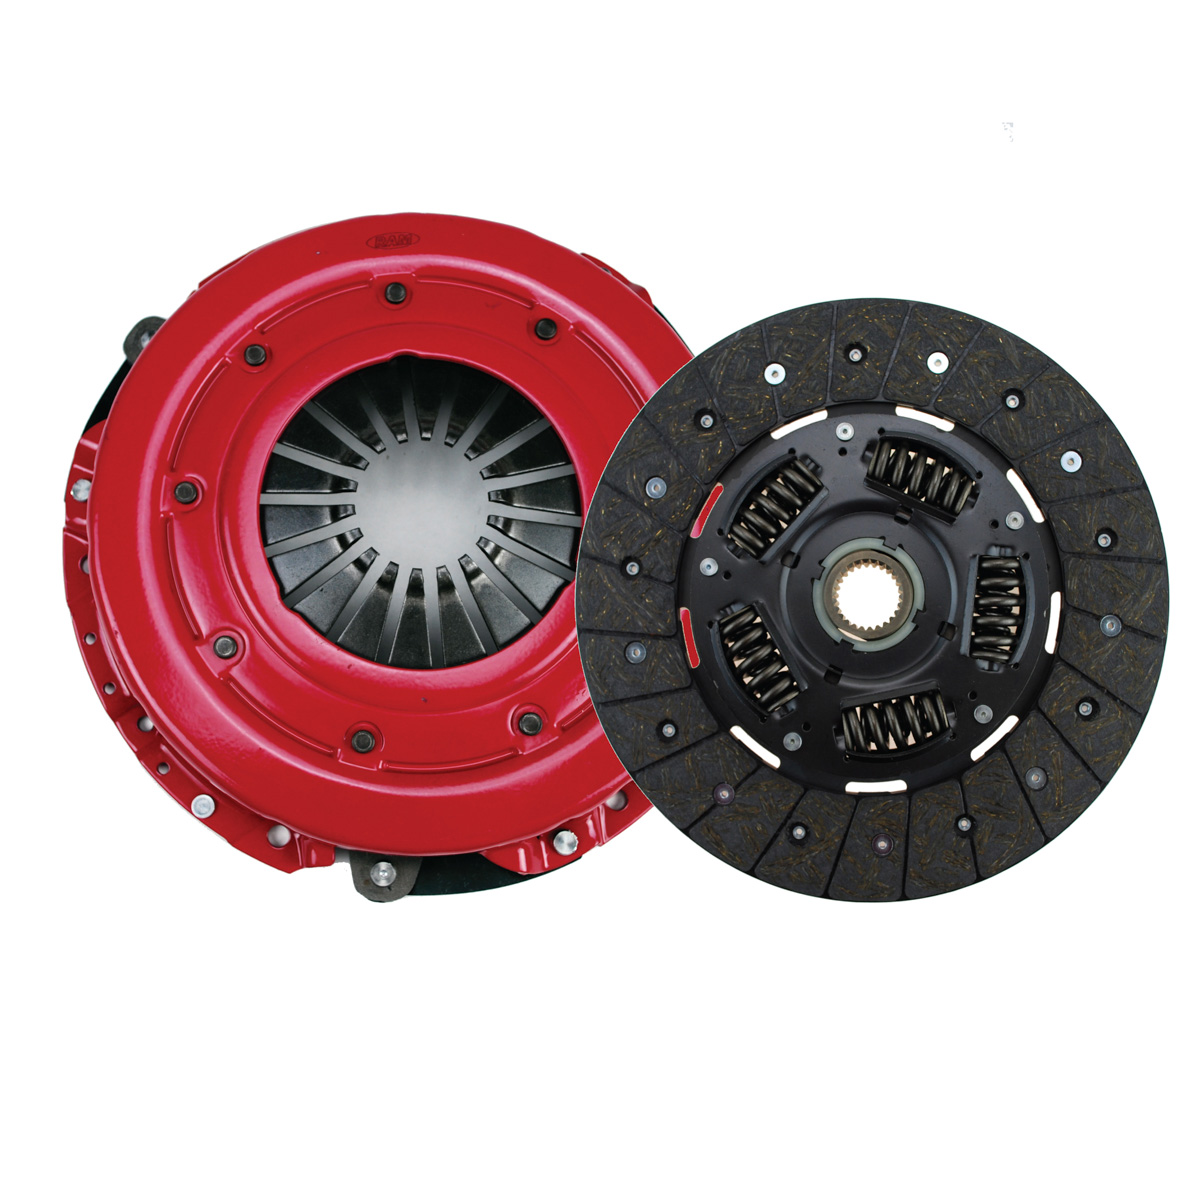 Ram HDX Clutch for Ford Mustang 1986-1993